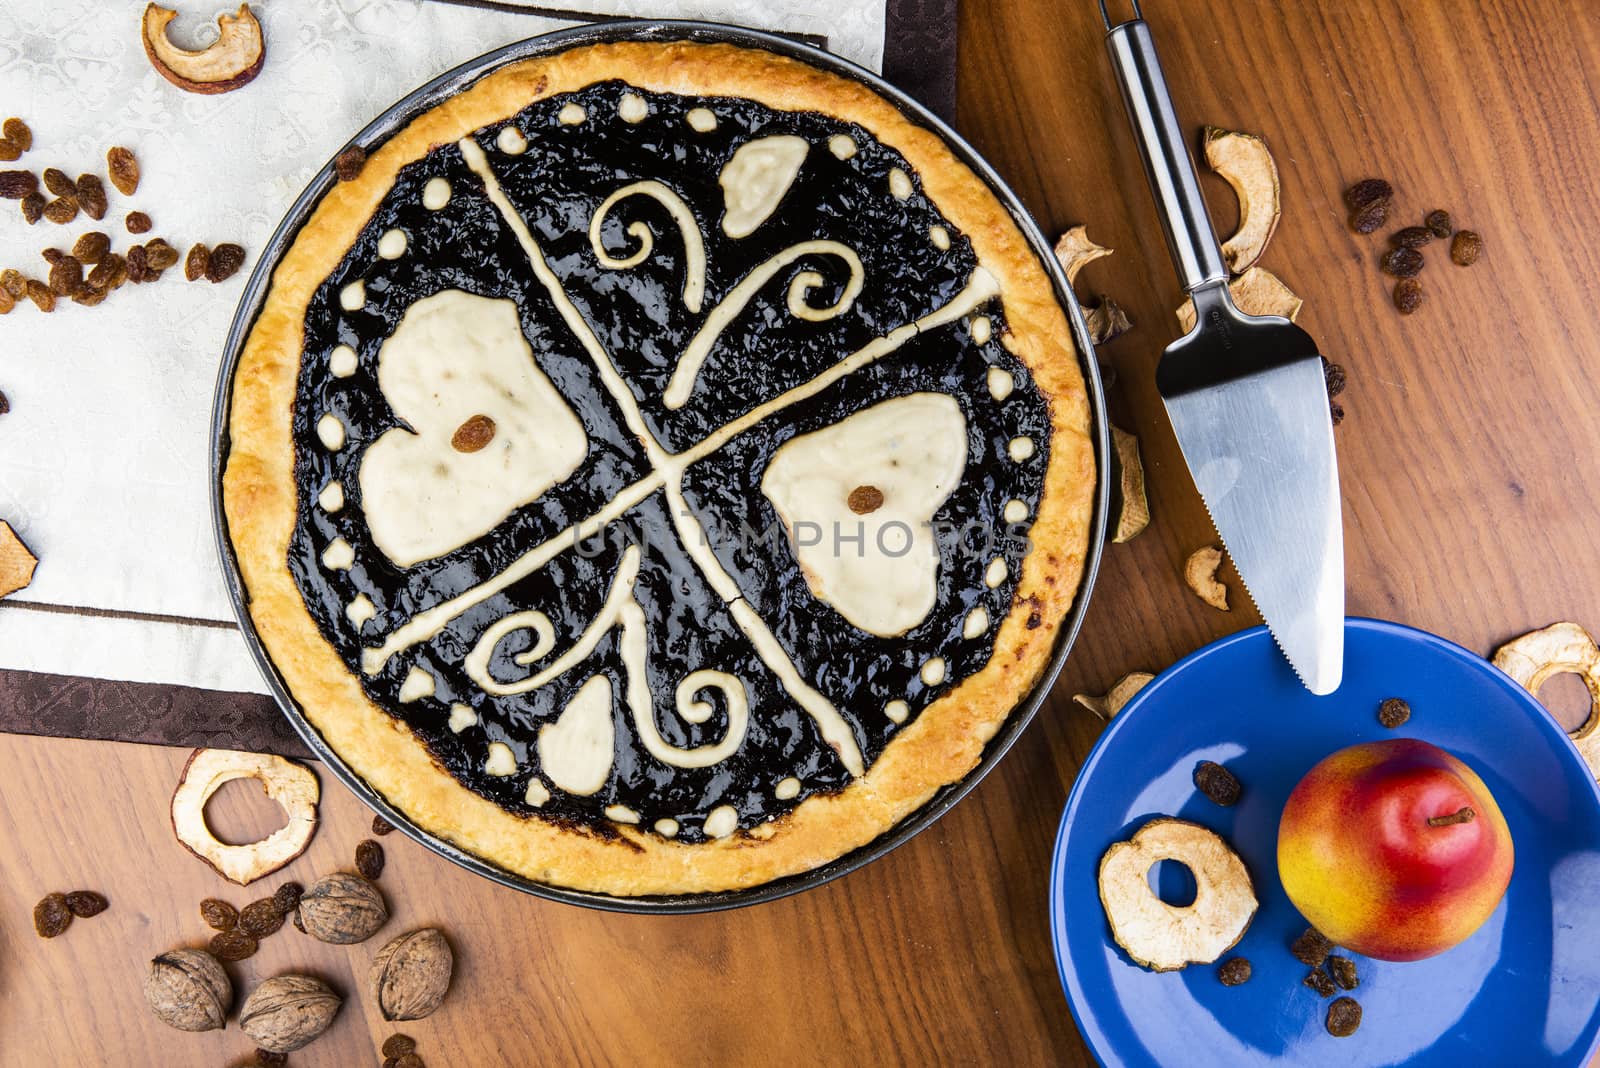 Czech traditional hand and home made round pie Chodsky kolac - speciality of Chodsko region. This one has heart made of quark surounded by plum jam filling. Still life with nuts and fruits on a wooden table